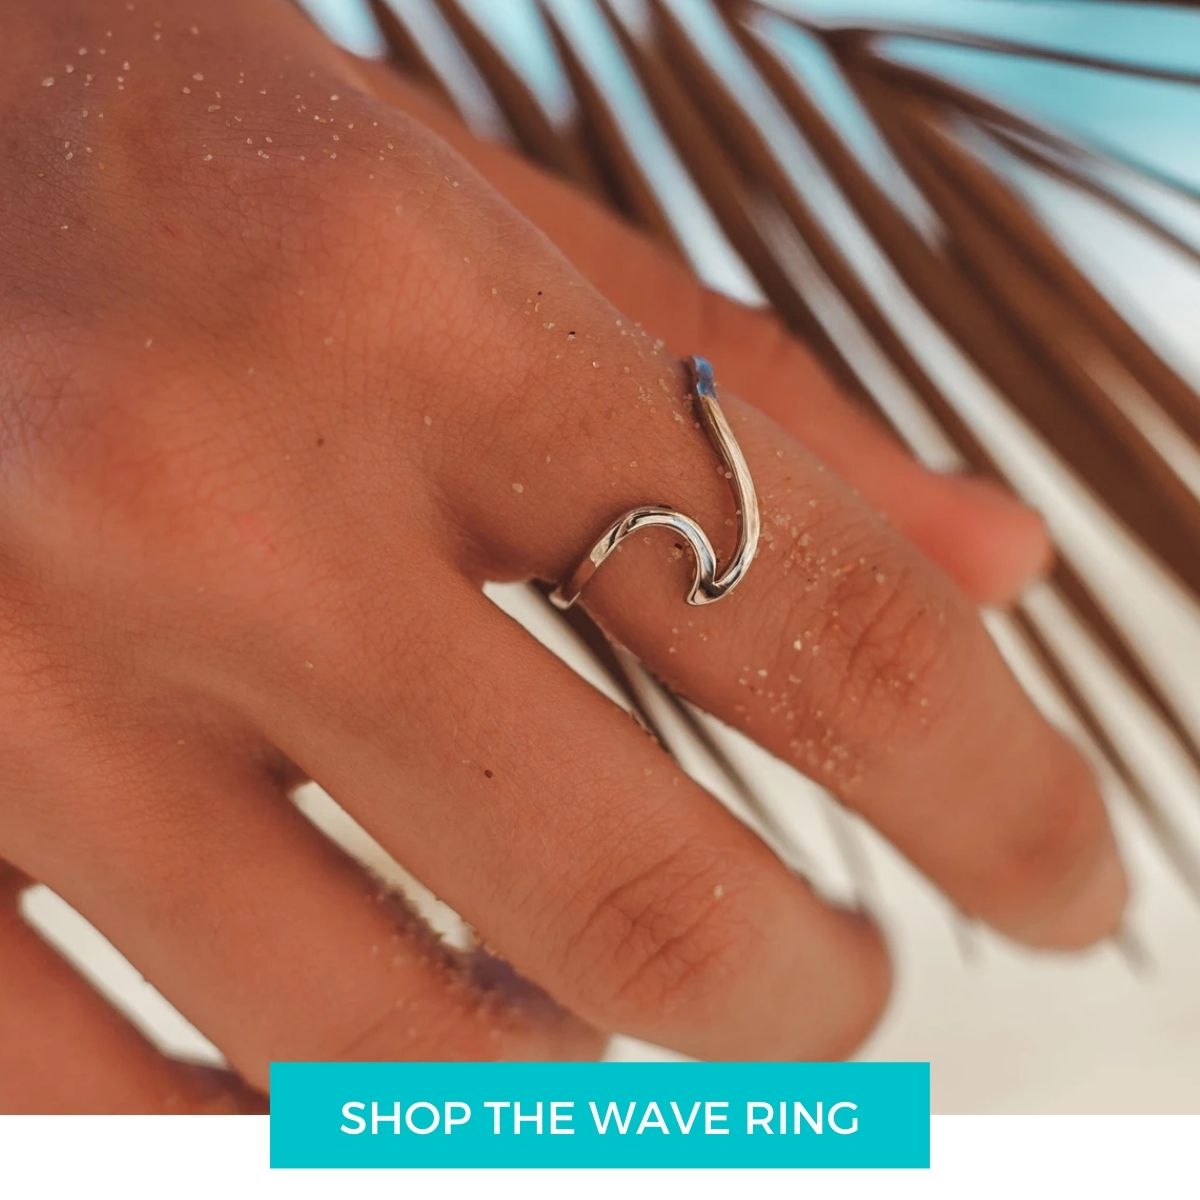 Wave ring meaning